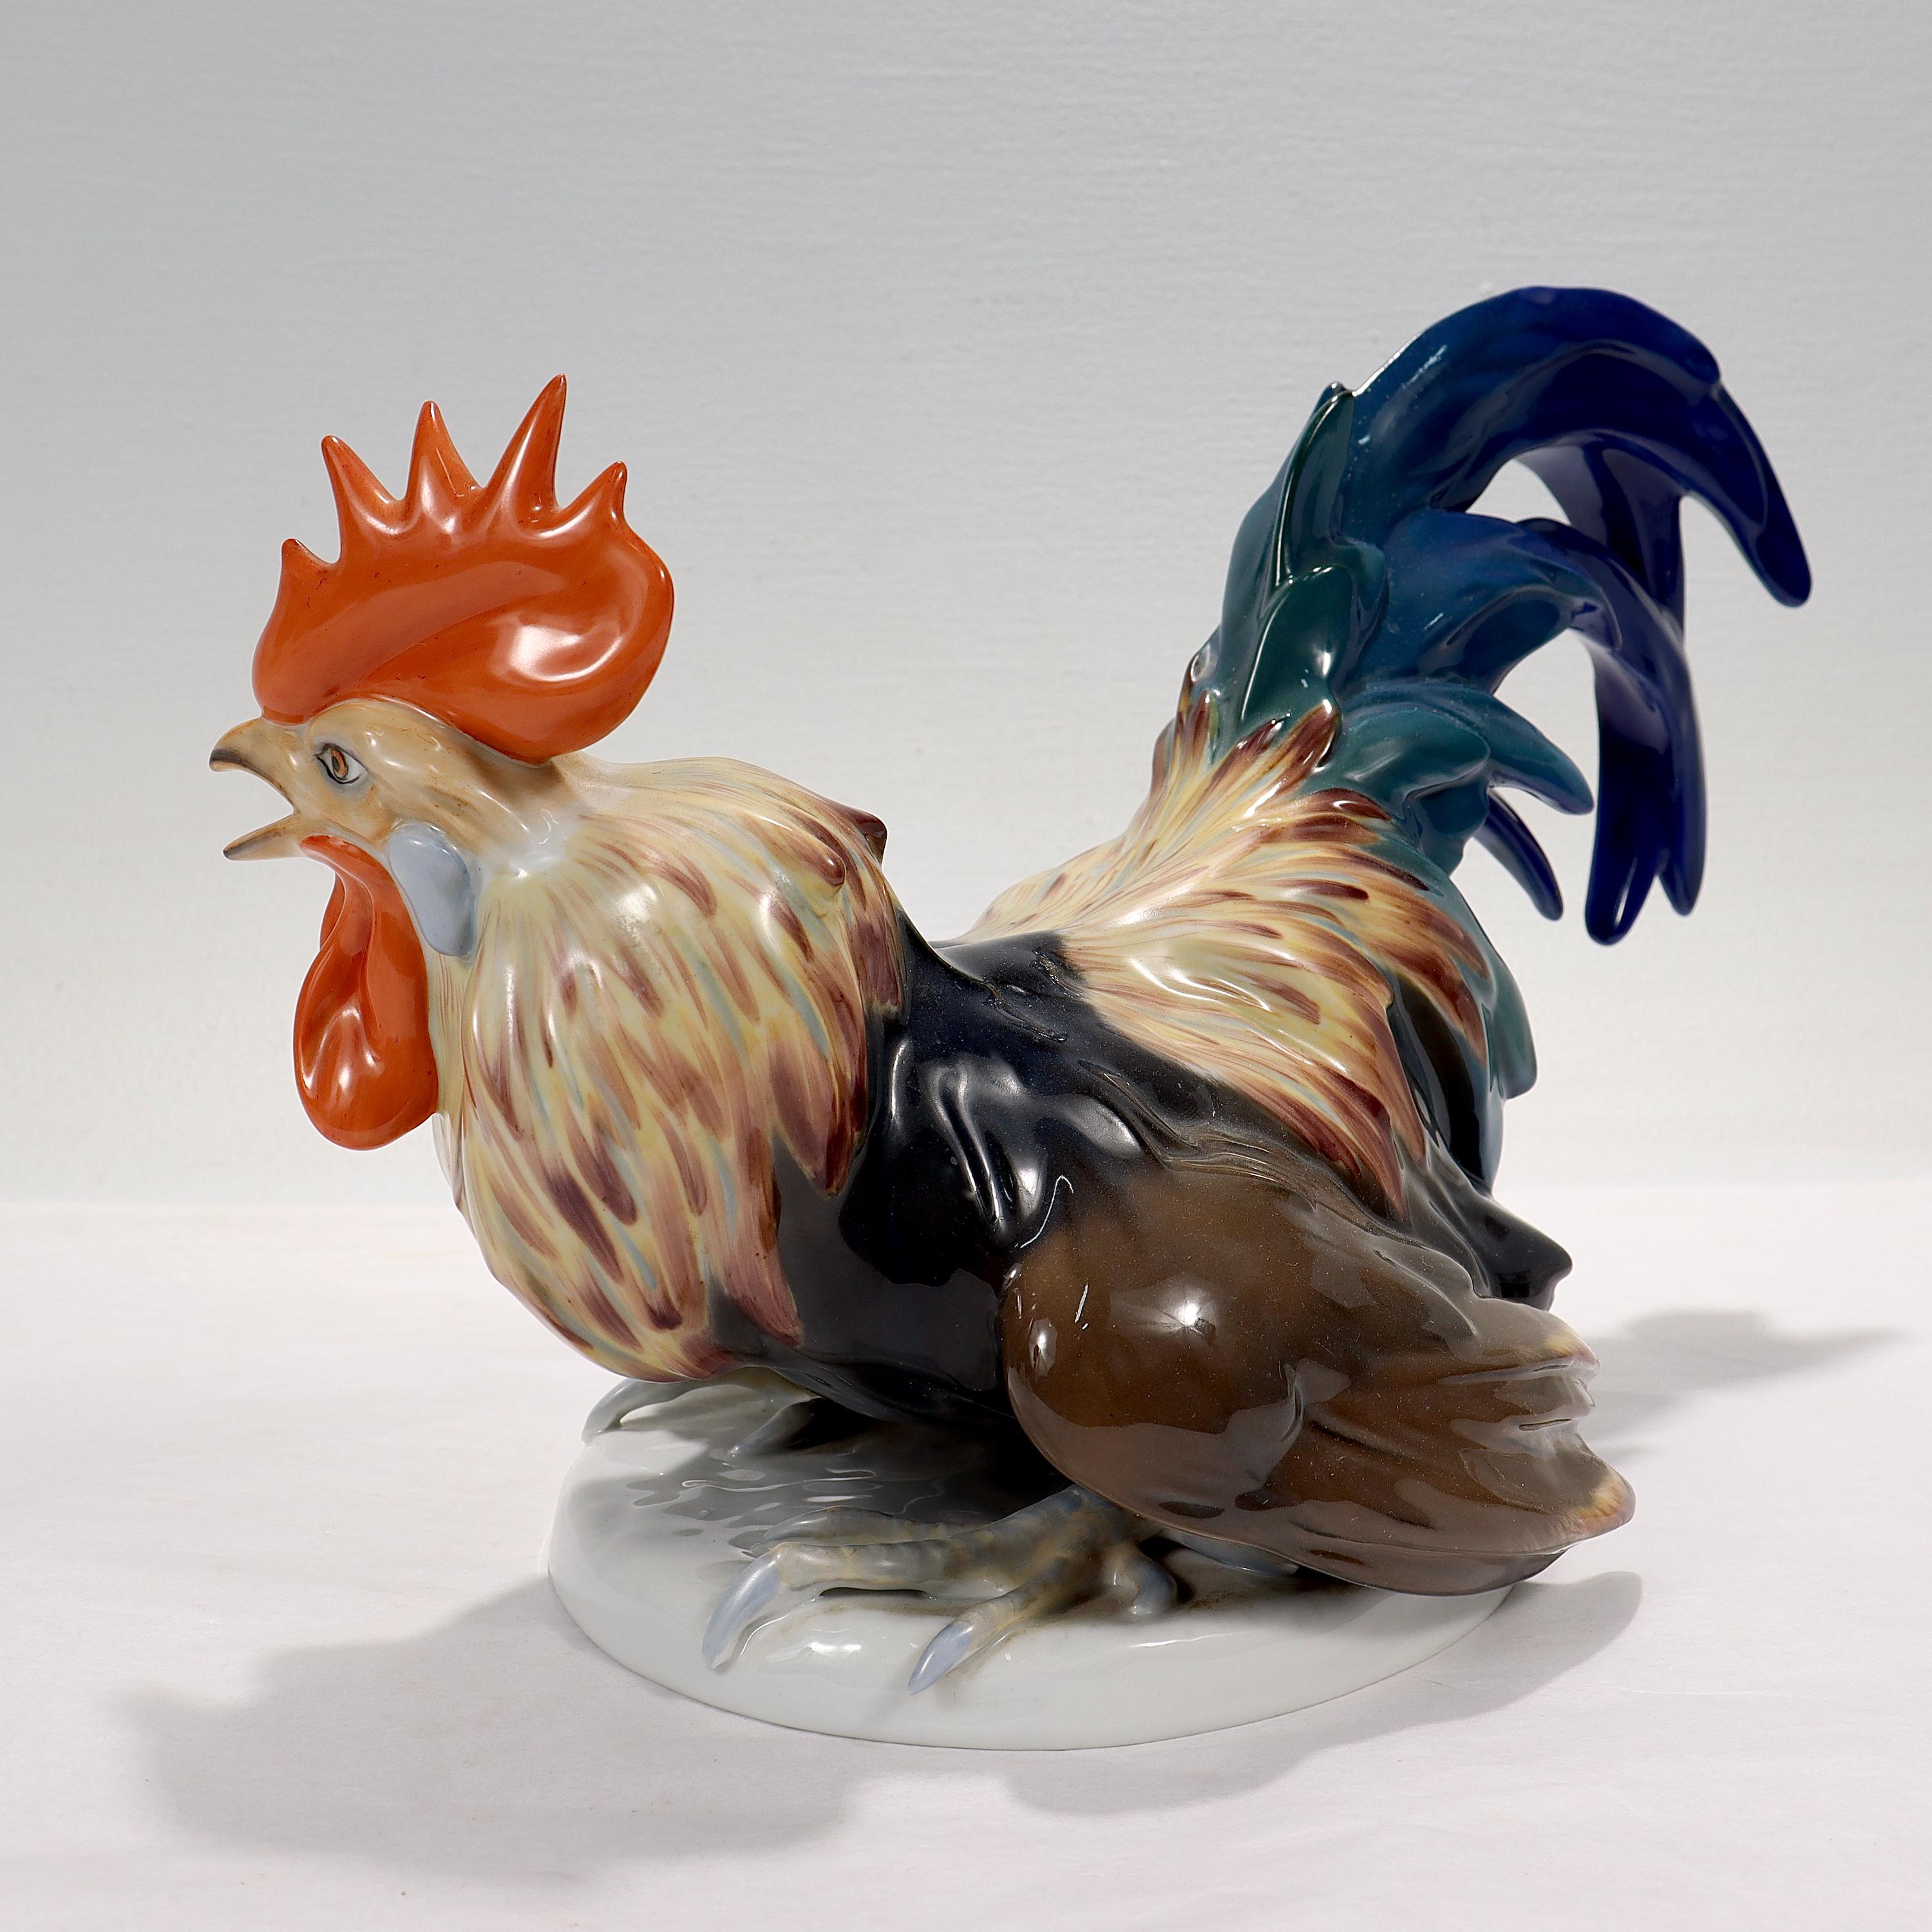 Mid-Century Modern Large Mid-Century Rosenthal Porcelain Figurine of a Rooster by J. Feldtmann For Sale